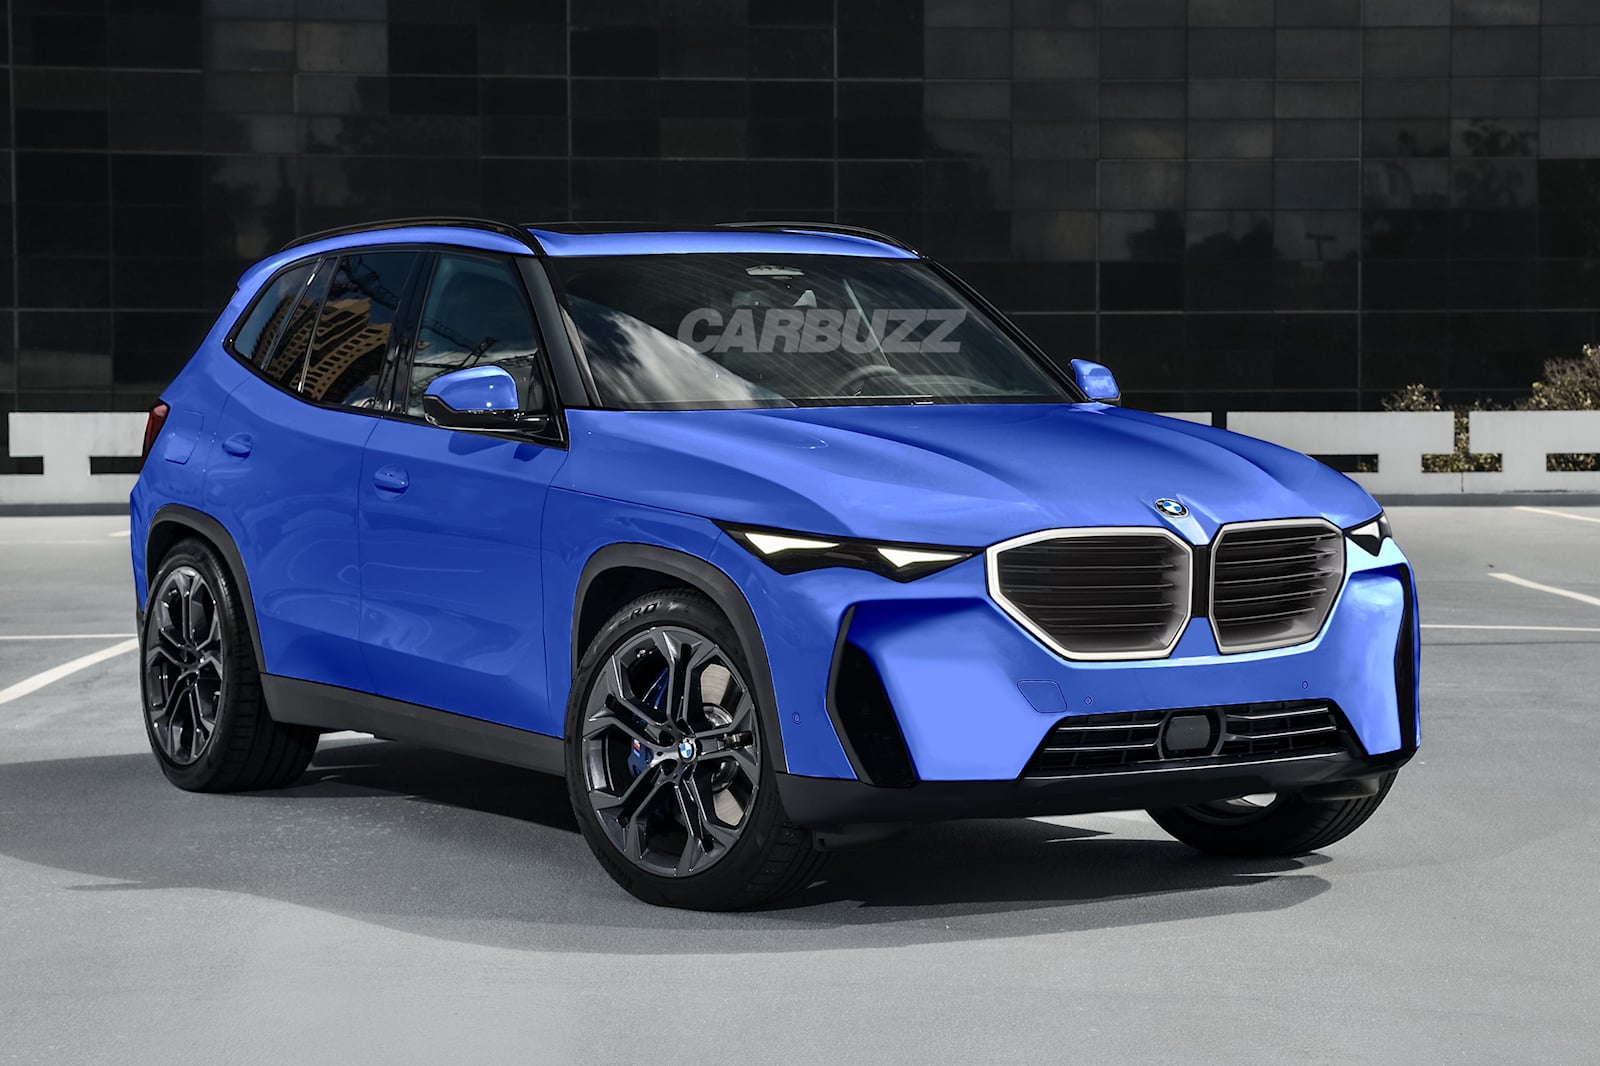 The next generation BMW X5 looks epic with XM-inspired styling